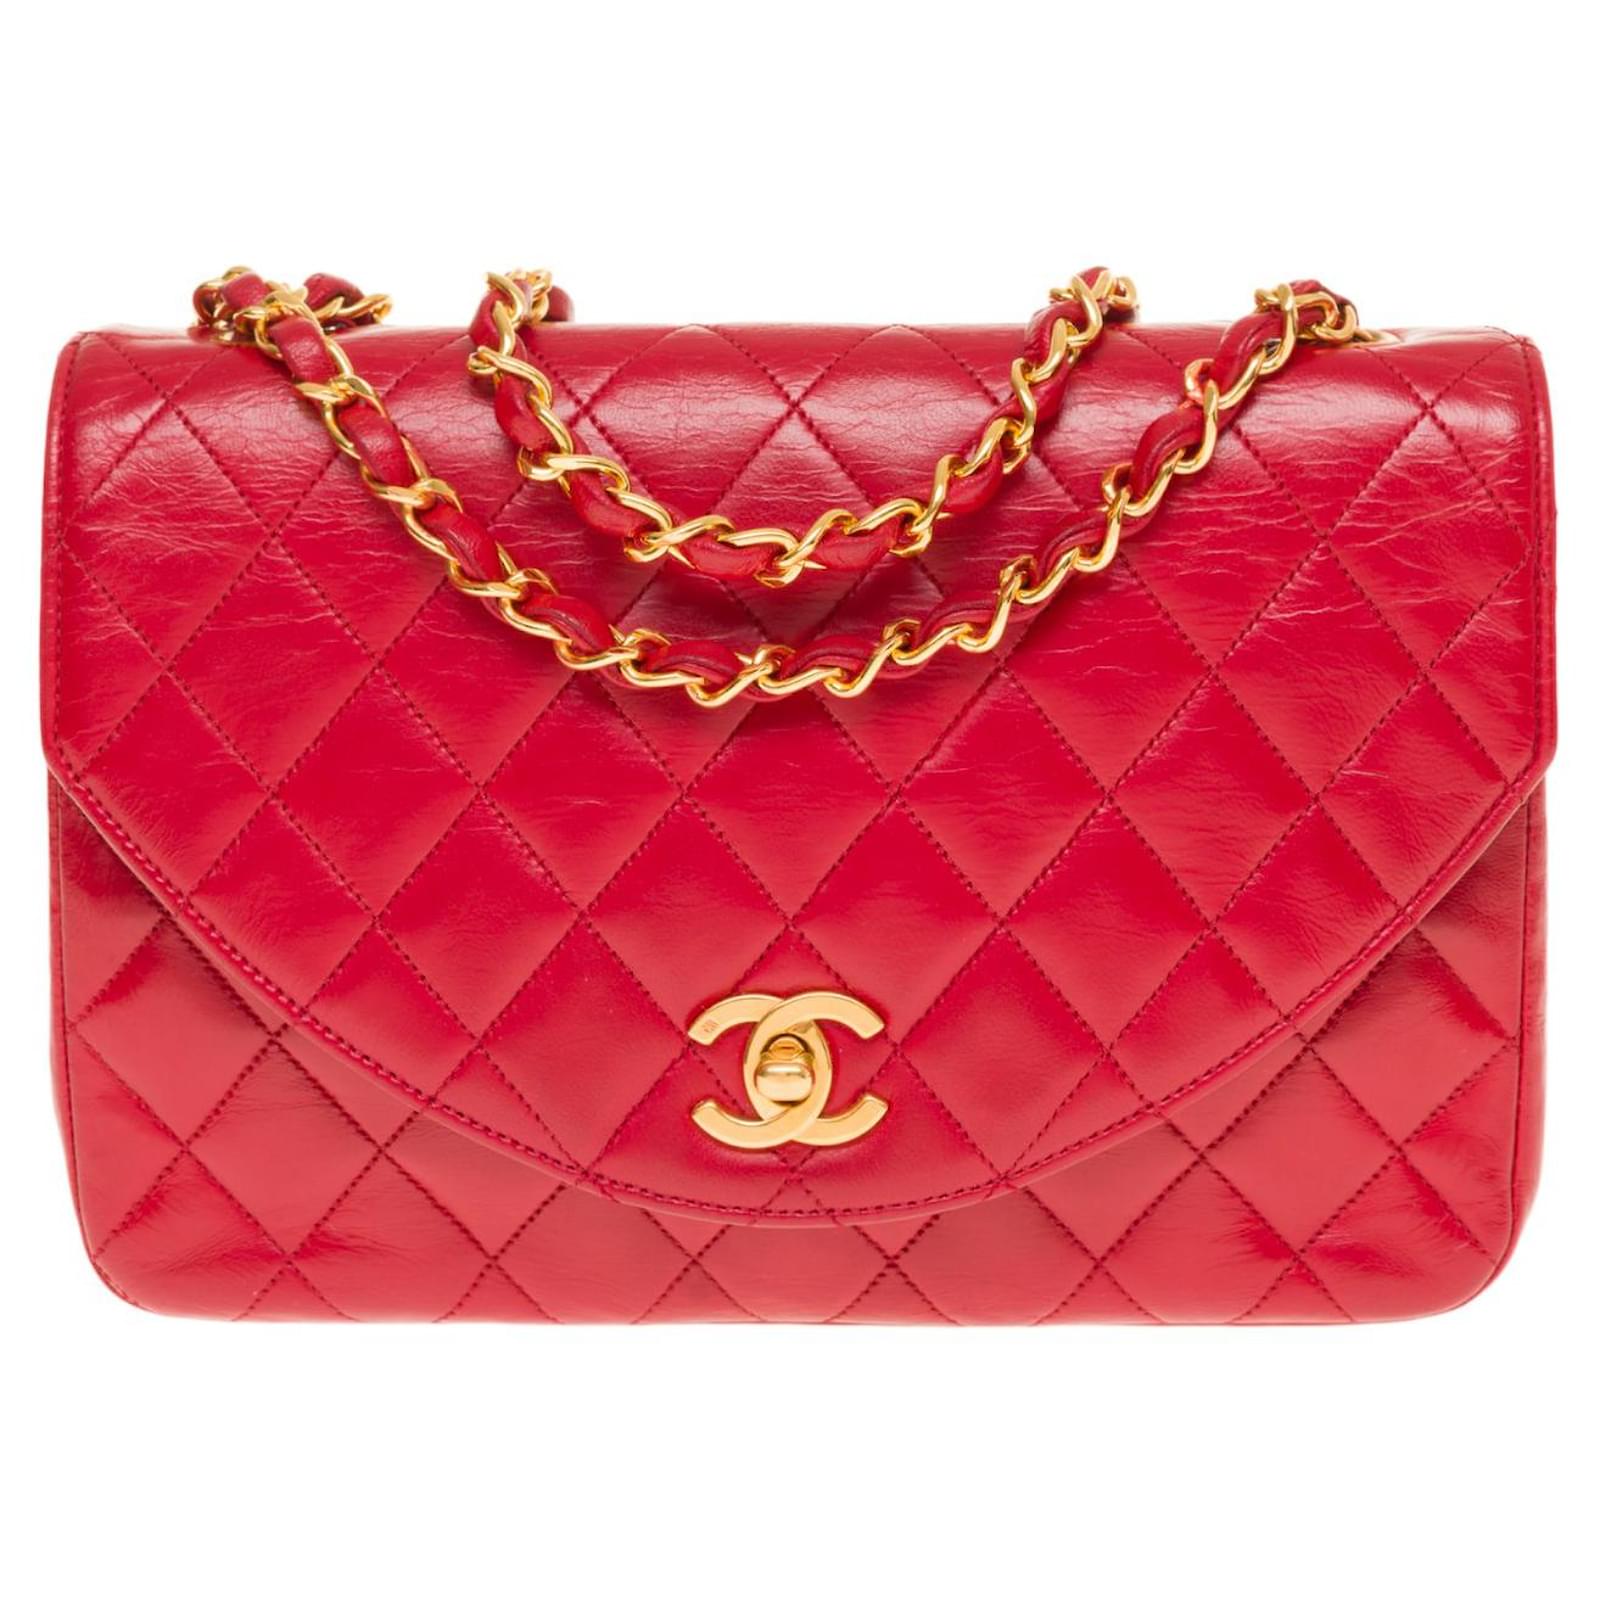 chanel free gift with purchase